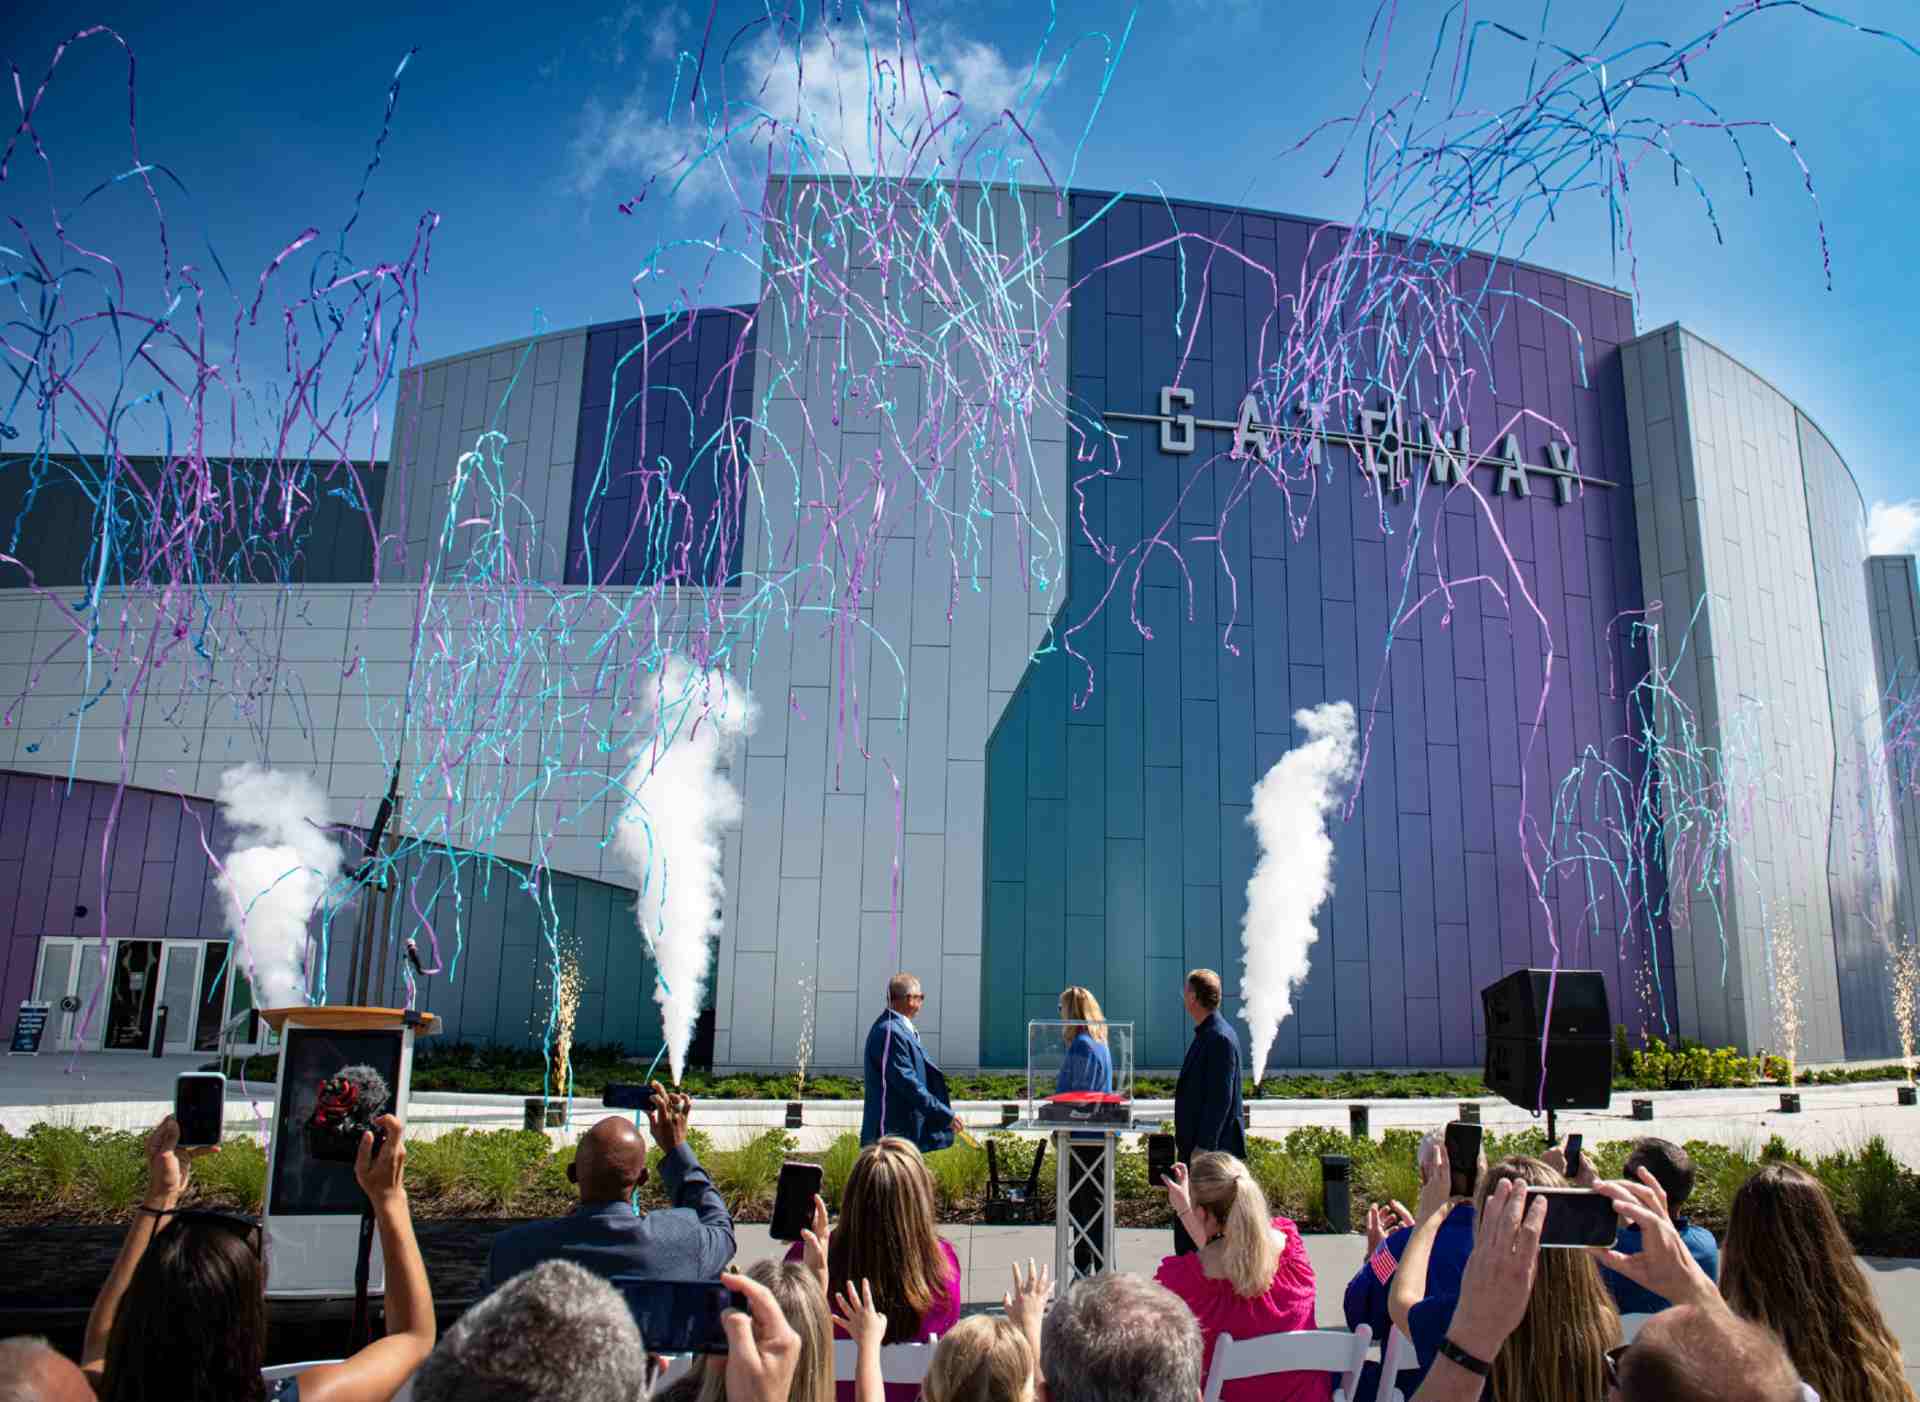 Jerry Jacobs, Jr., CEO, Delaware North, Janet Petro, director, Kennedy Space Center and Therrin Protze, COO, Kennedy Space Center Visitor Complex, officially opened Gateway™: The Deep Space Launch Complex